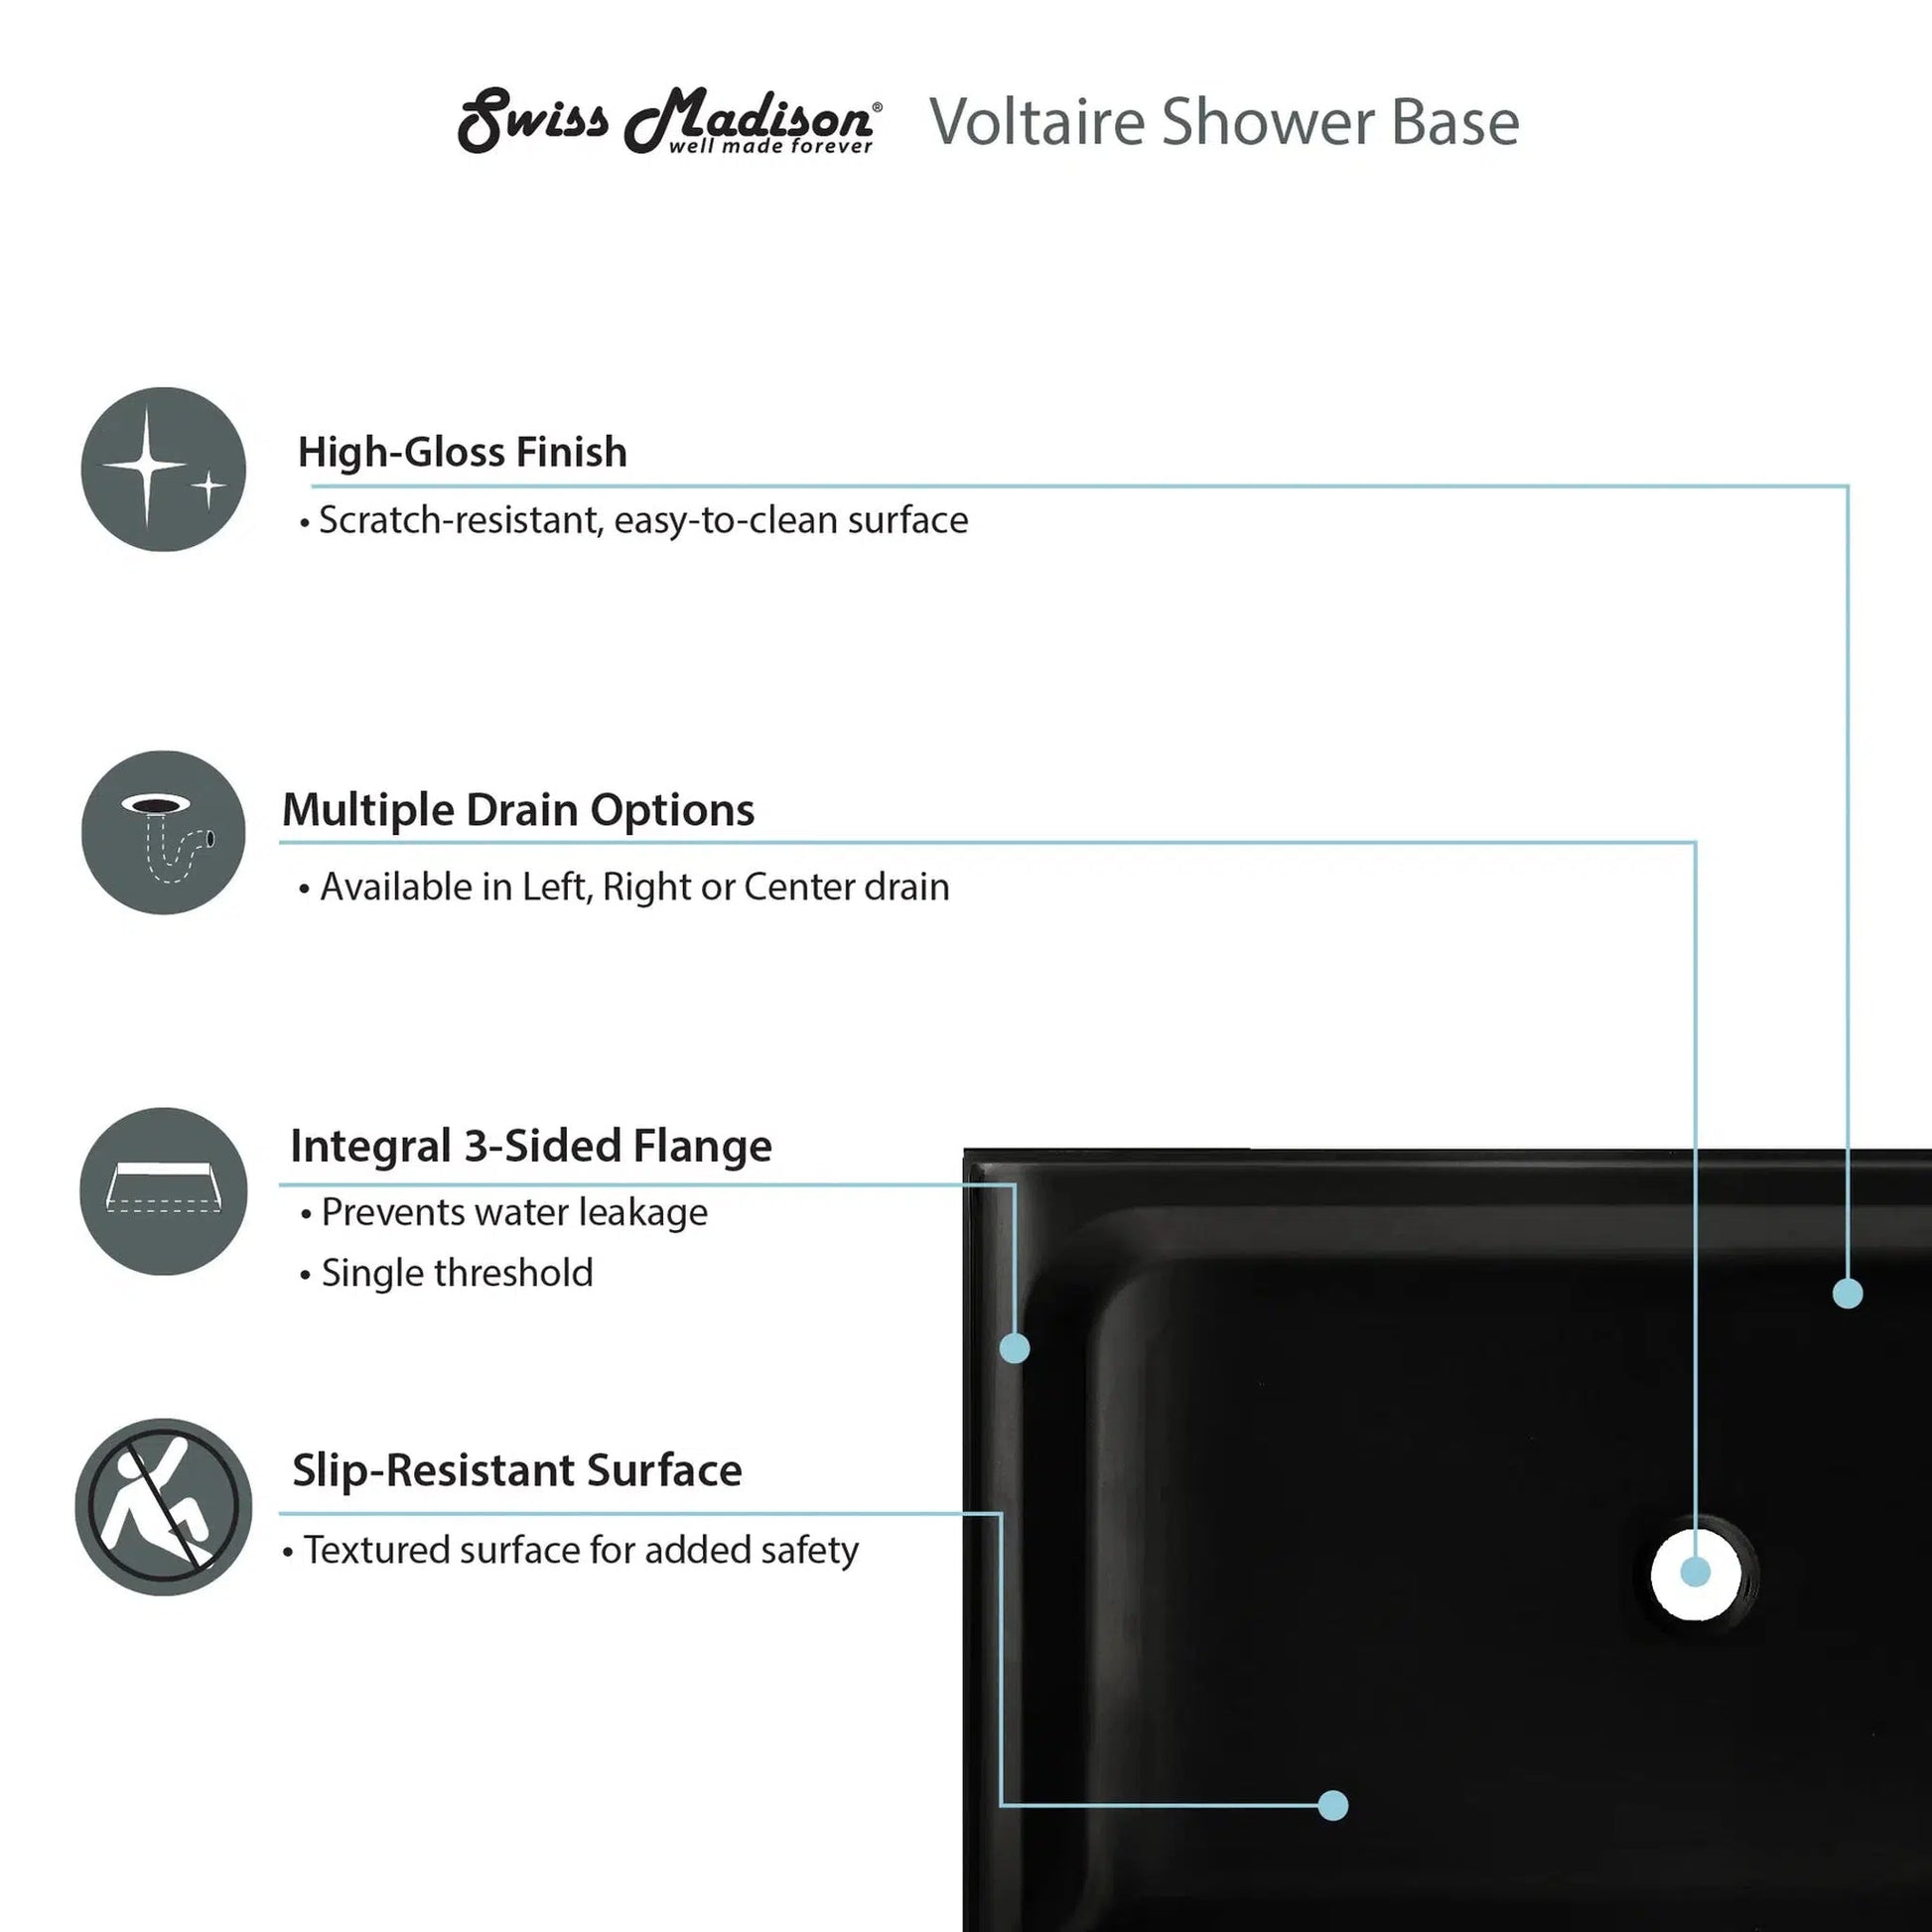 Swiss Madison Voltaire 36" x 36" Three-Wall Alcove Black Center Drain Shower Base With Built-In Integral Flange